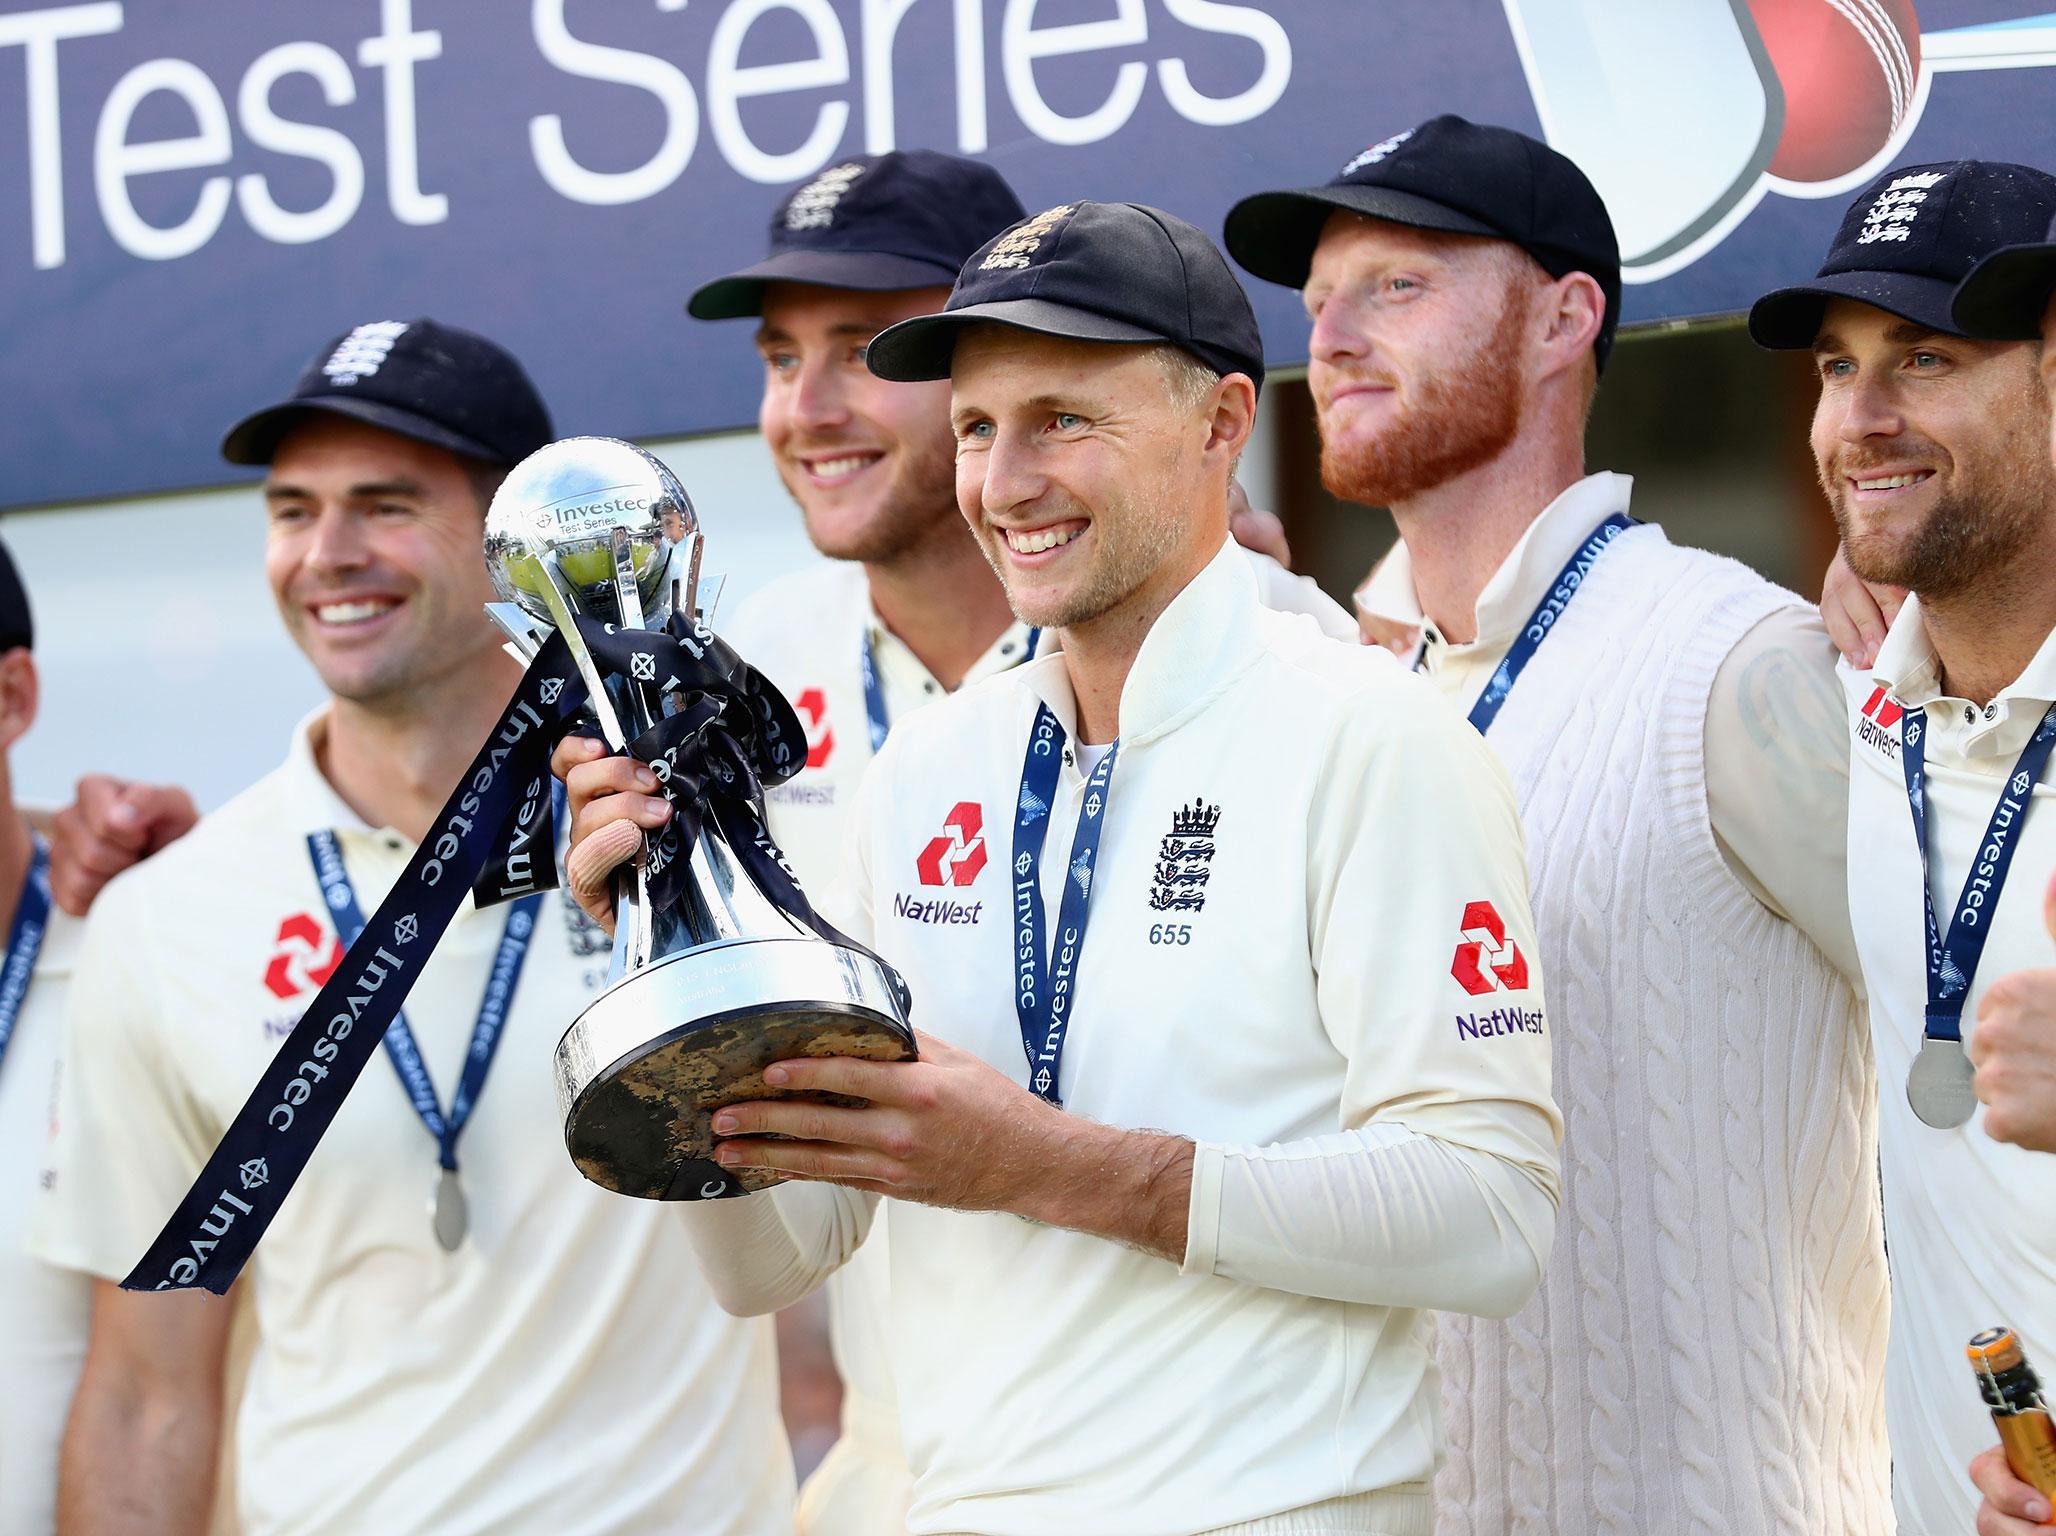 Joe Root could move up the order in Australia to solve England's top order batting woes